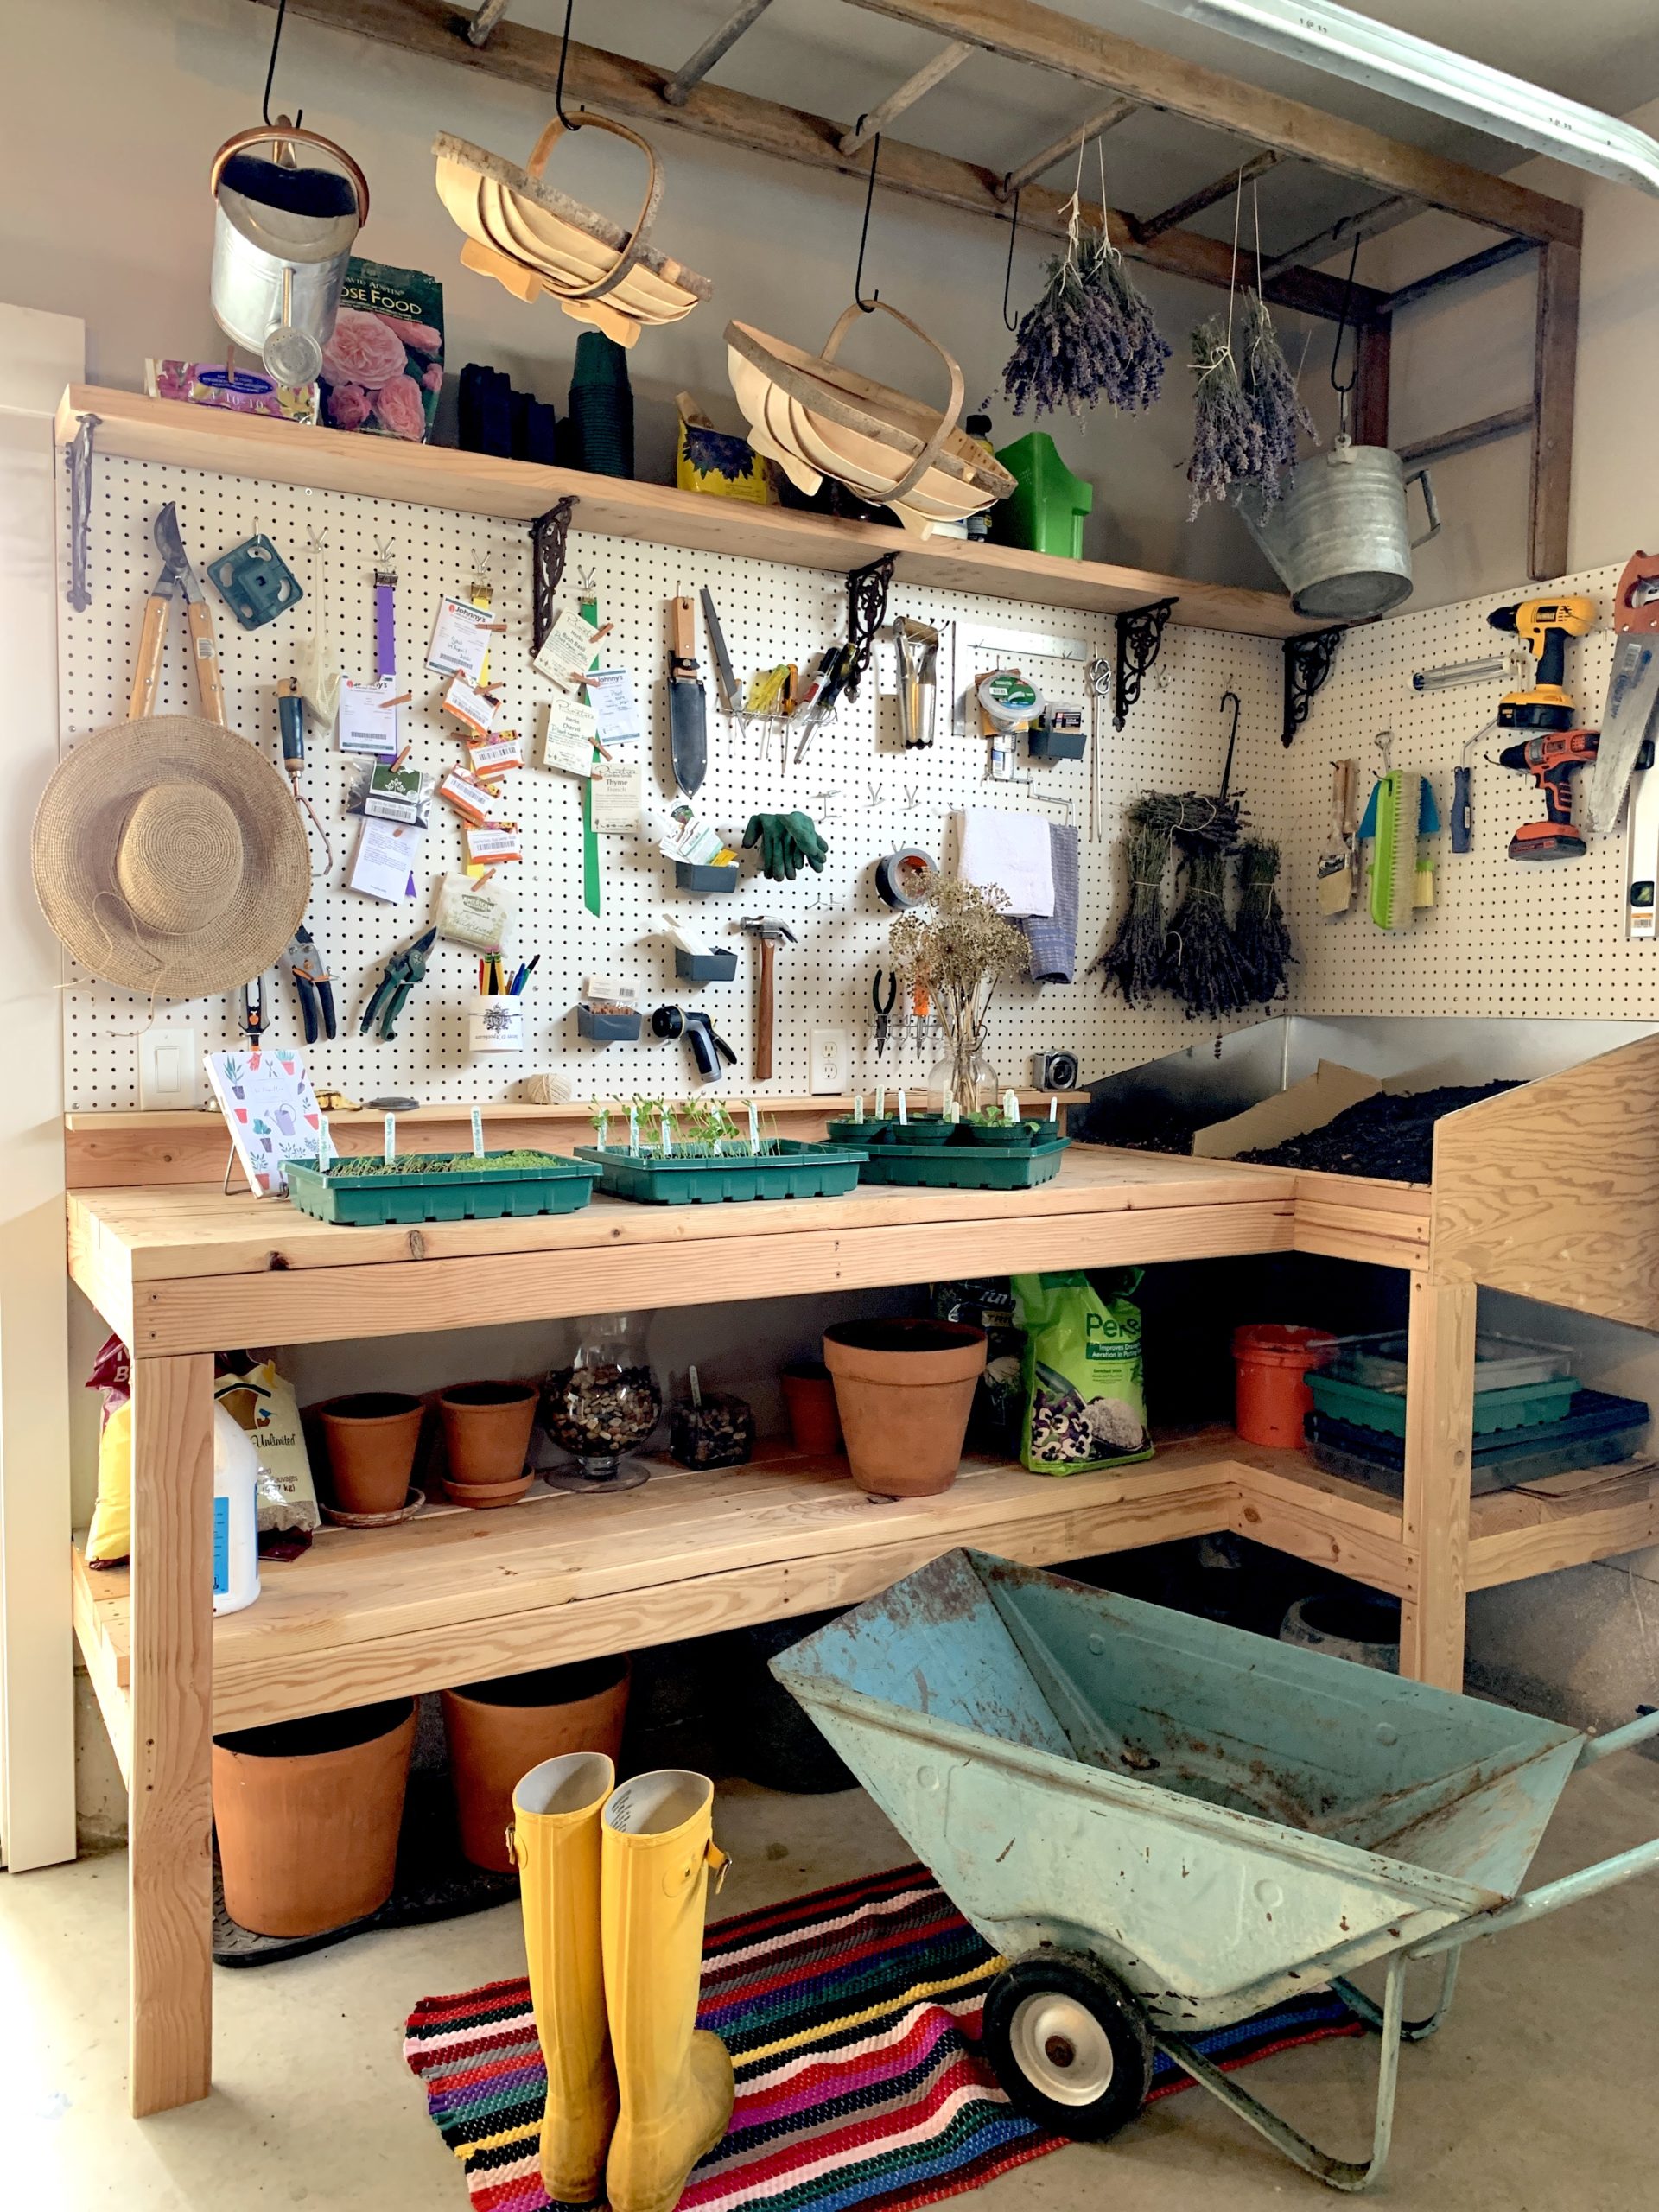 9 Ideas for Organizing an Inviting Indoor Gardener Work Space + A Tour of My Potting Table